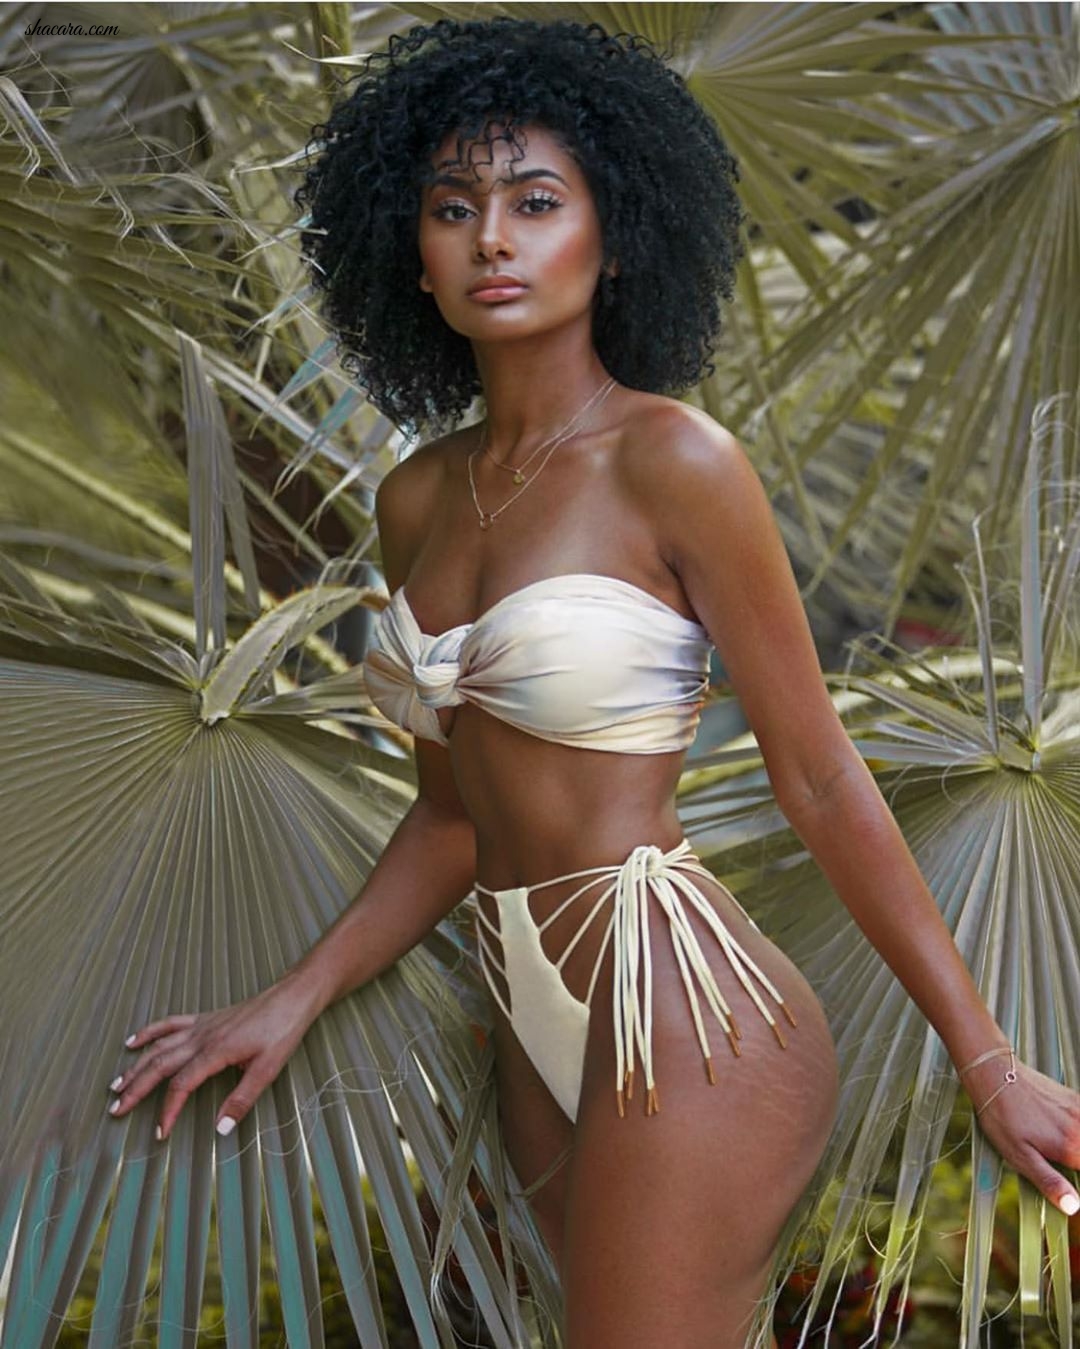 Essence Fashion House: Support These Black Swimwear Brands Celebrating All Body Types